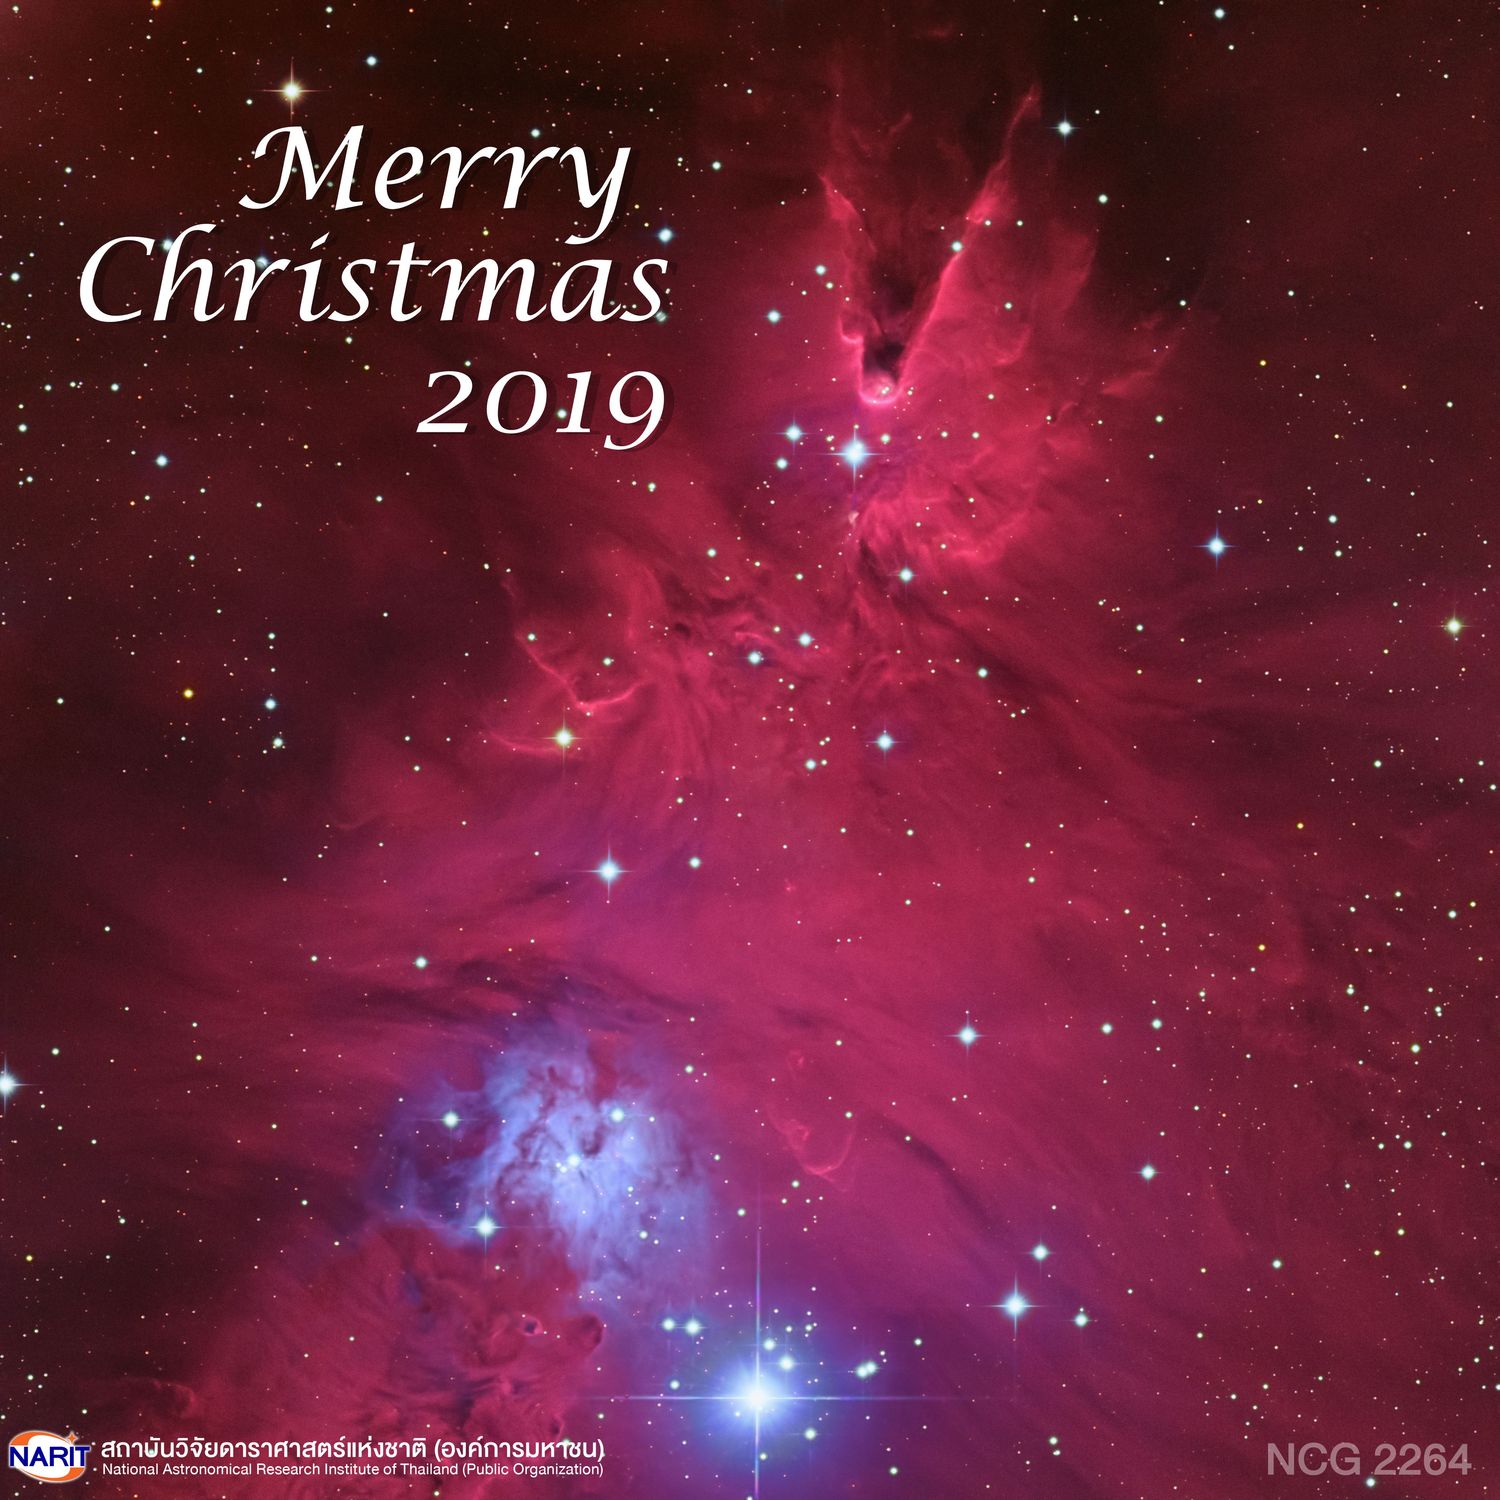  Cone Nebula, and the Christmas Tree Cluster